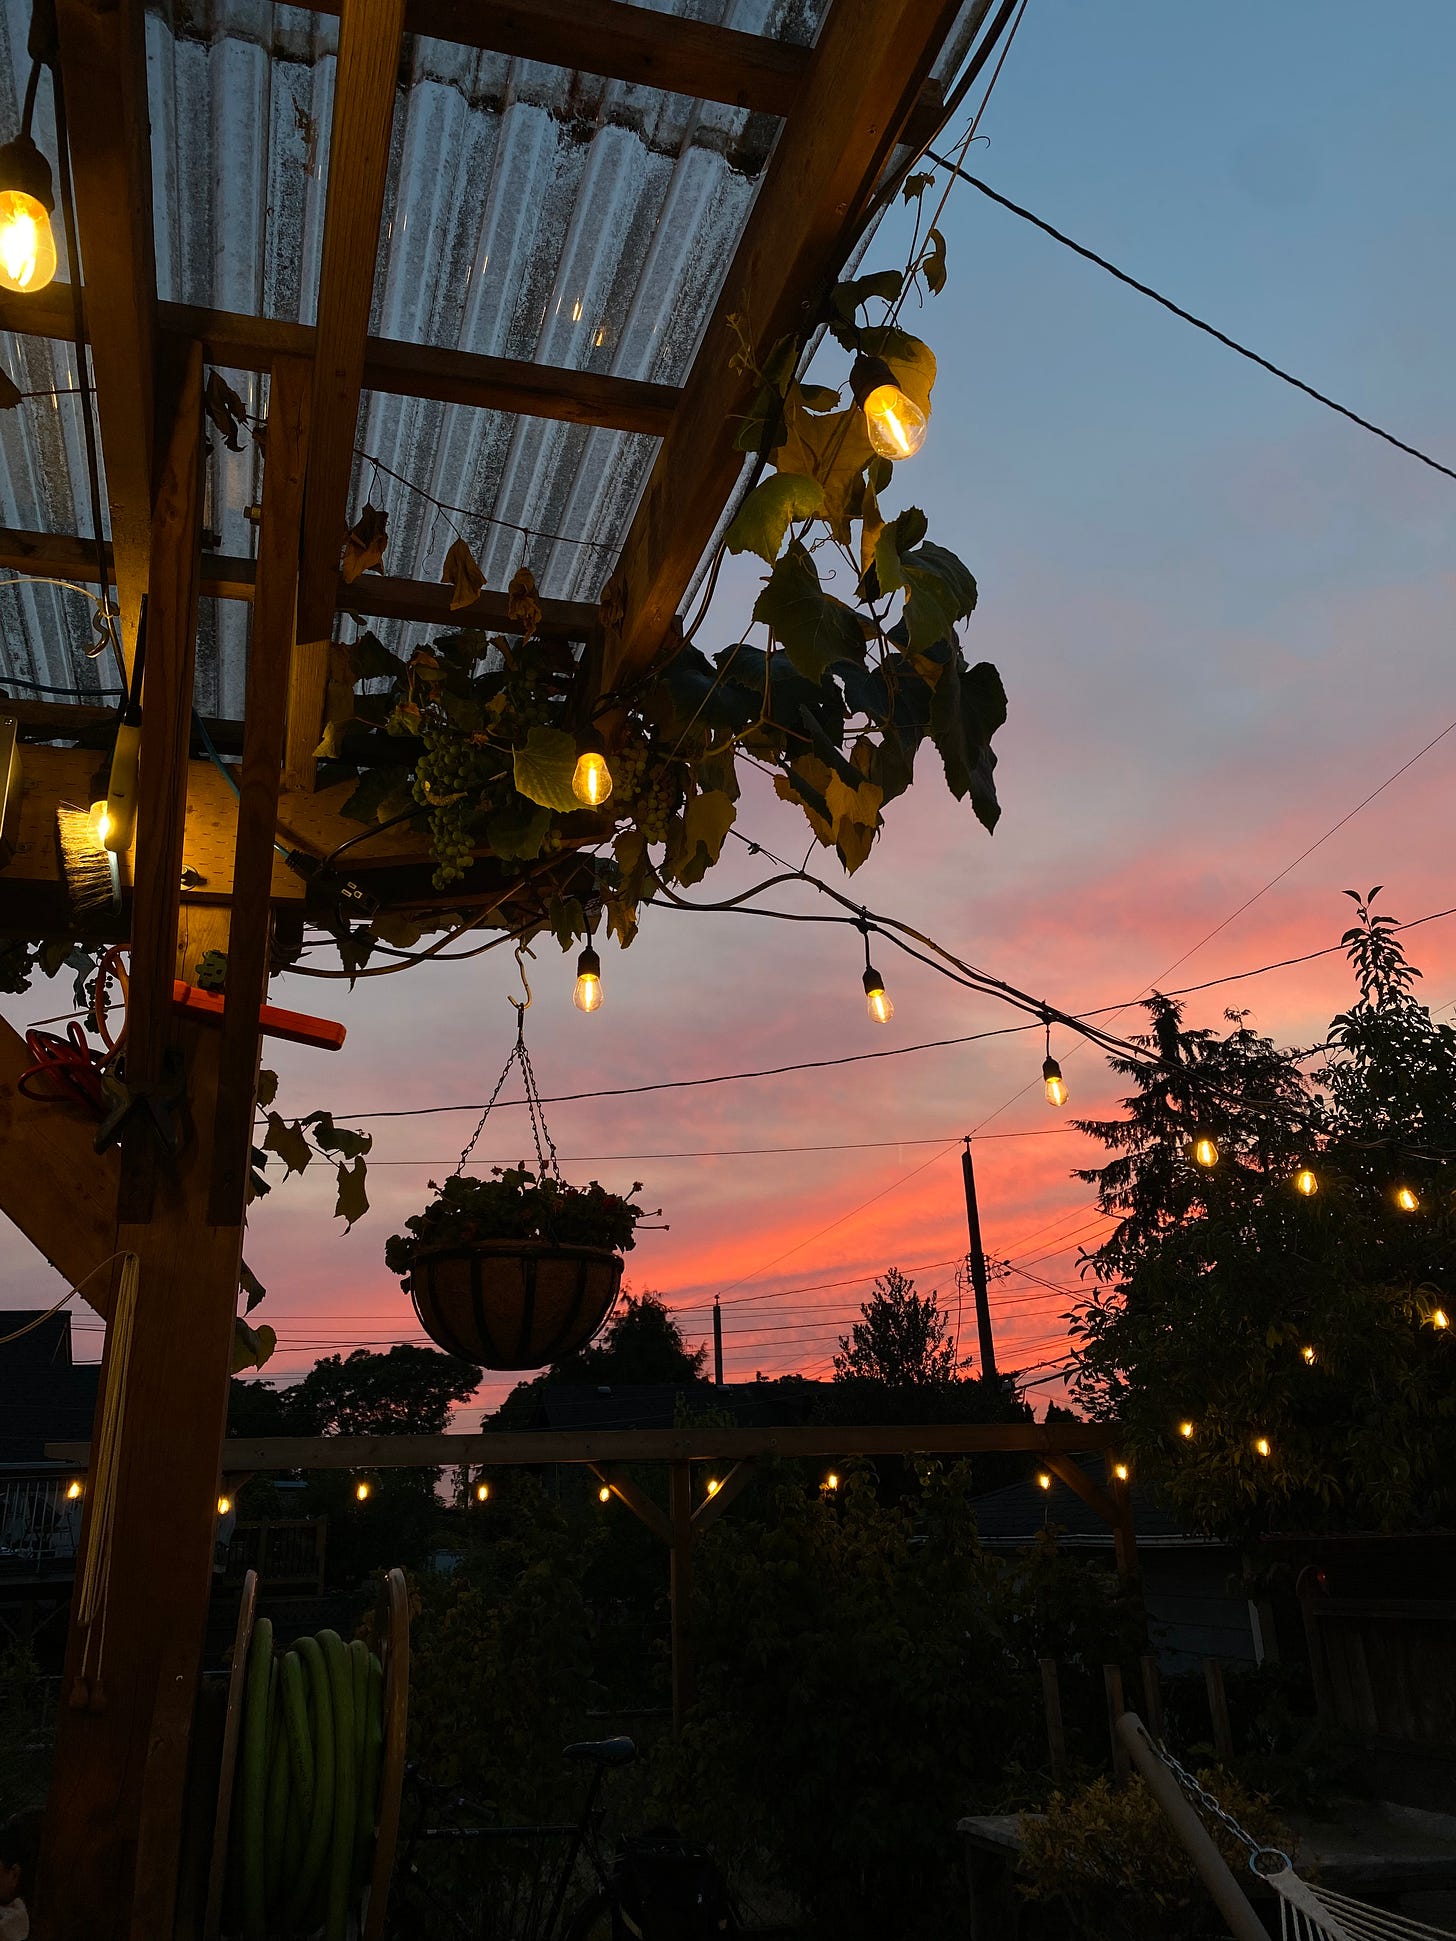 A hot pink sunset taken from a covered patio, with small white string lights lining the darkened yard. A hanging basket and grape vines frame the left side of the photo, and trees frame the right.